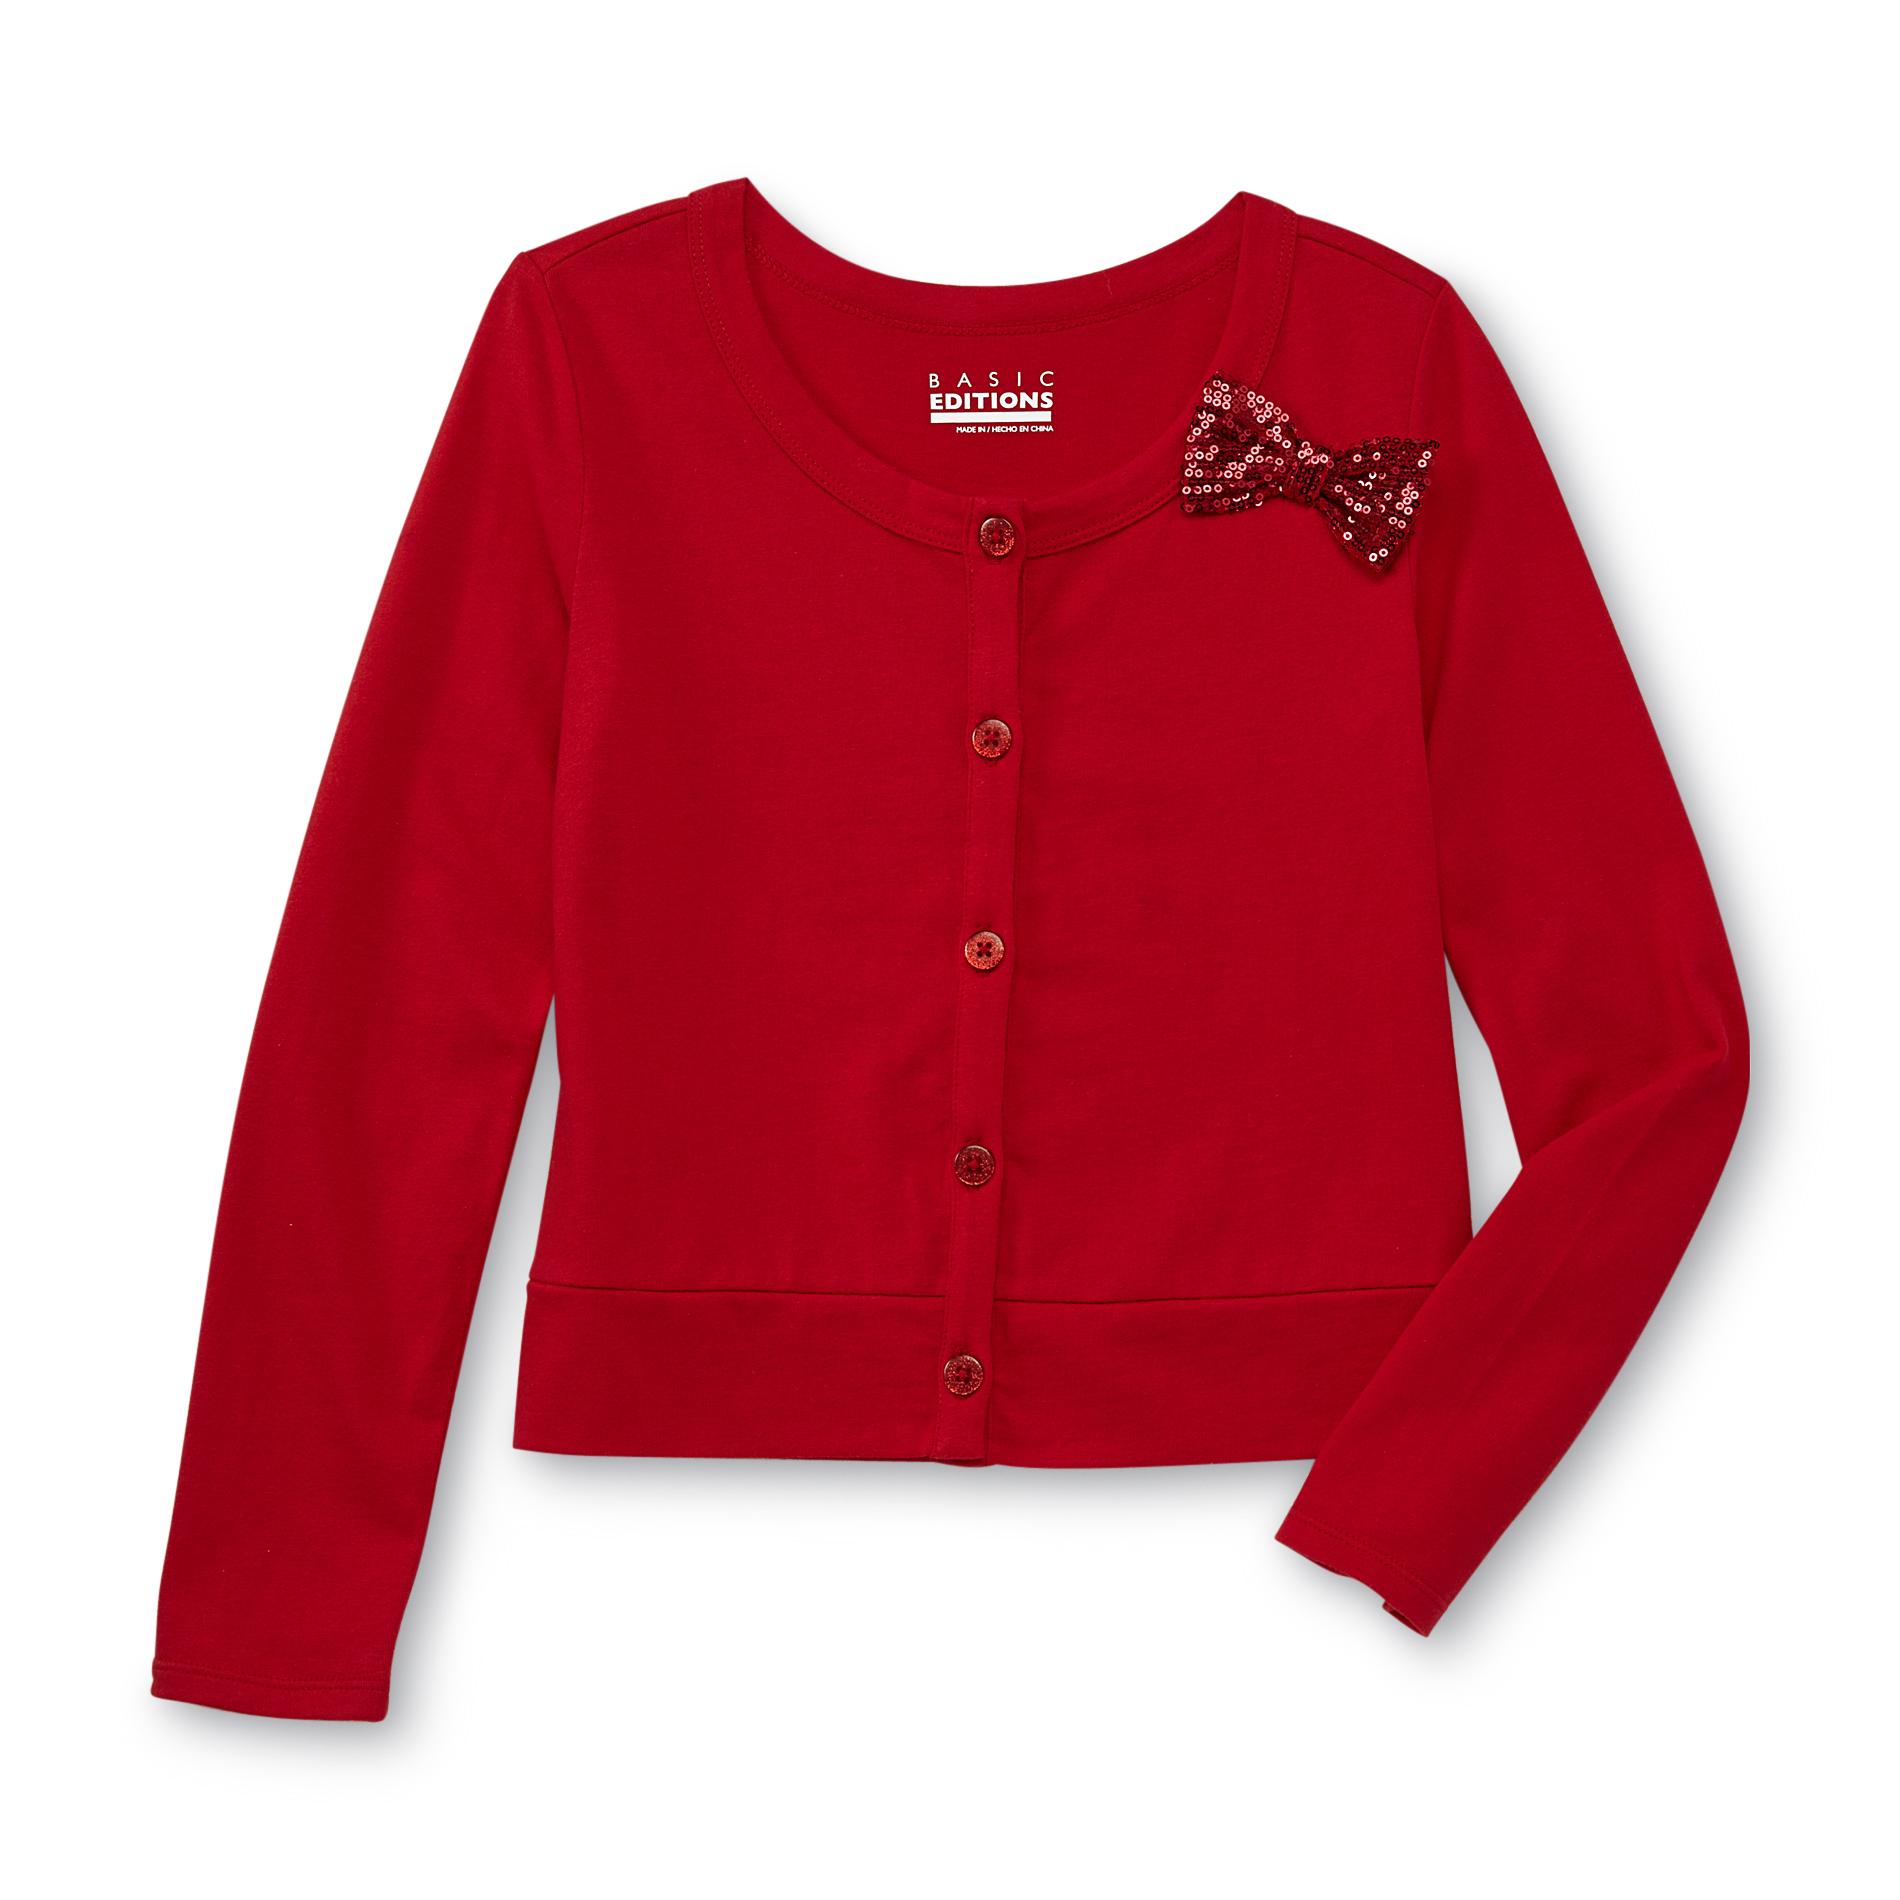 Basic Editions Girl's Knit Cardigan - Sequined Bow